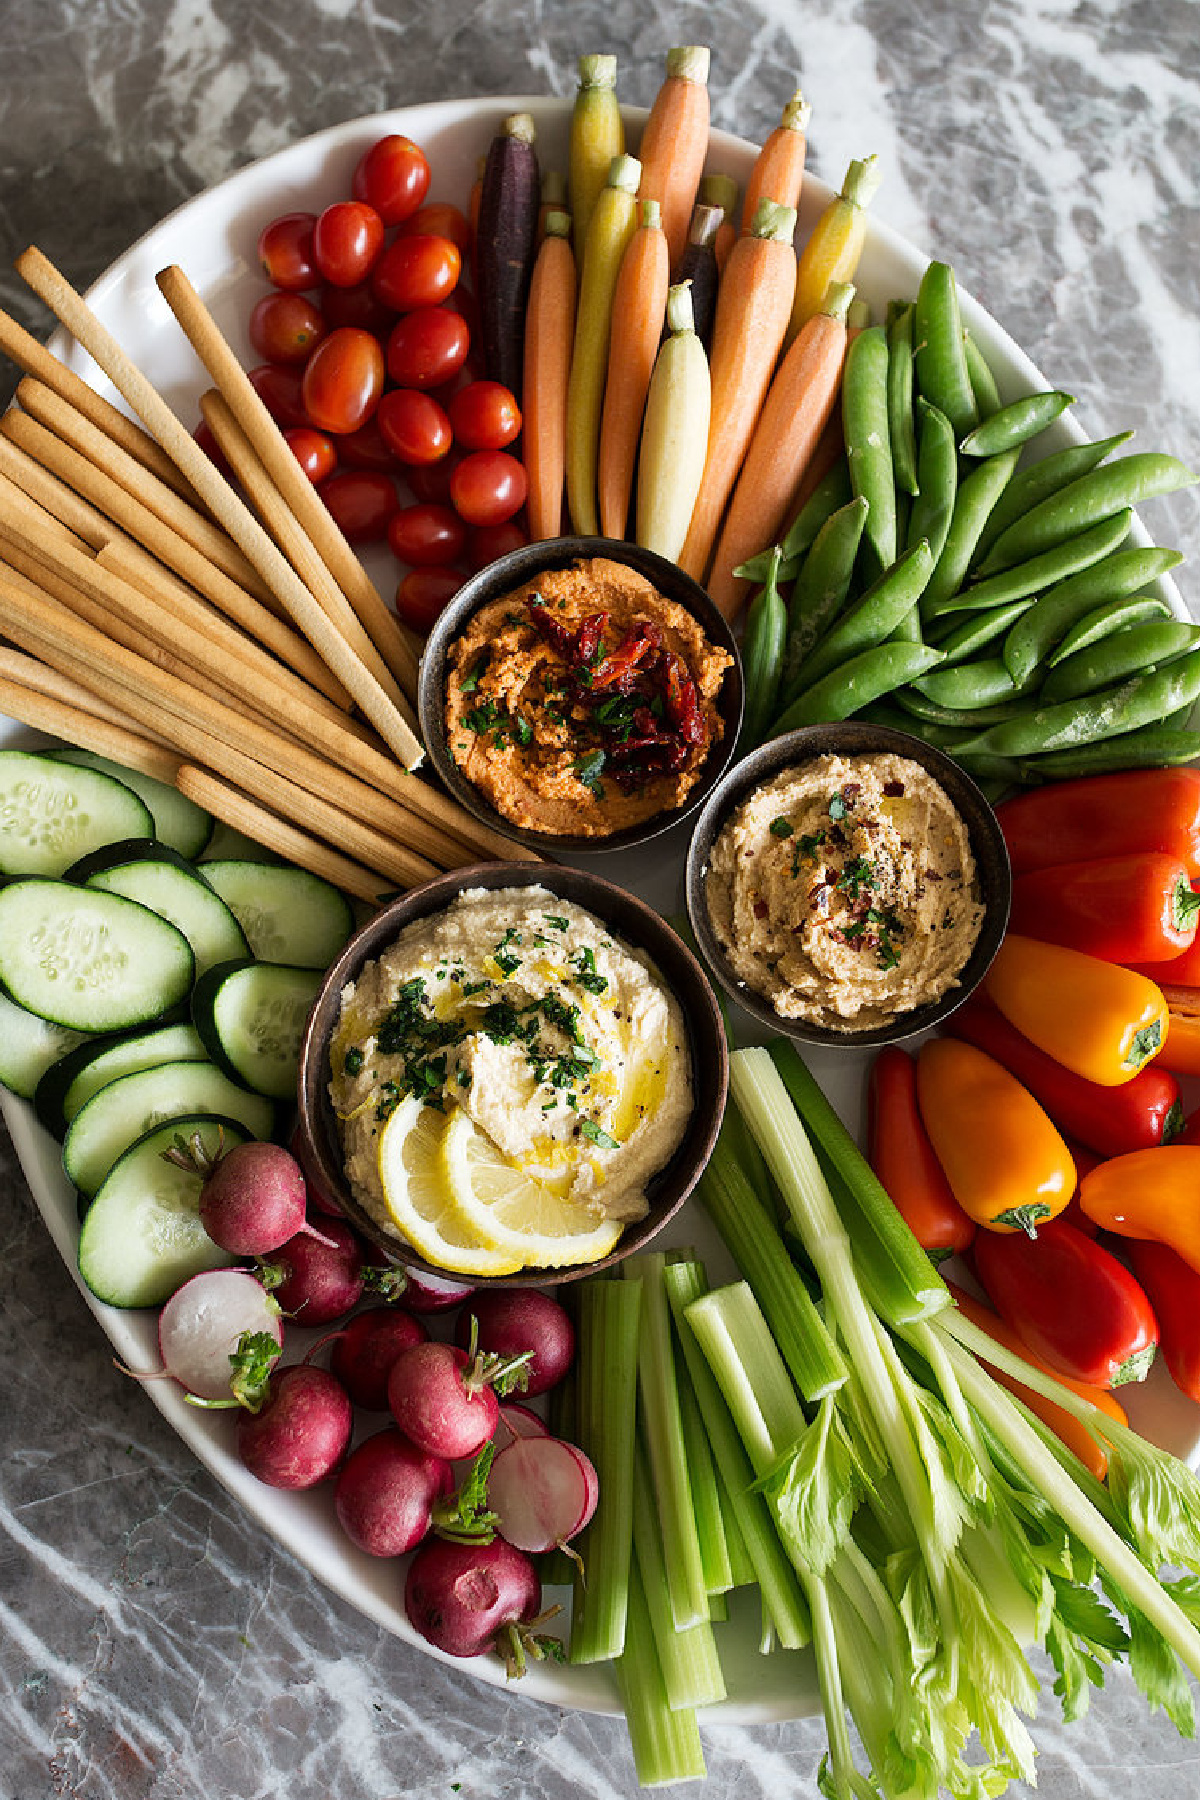 Cheap Party Foods - Vegetable Crudites with Hummus